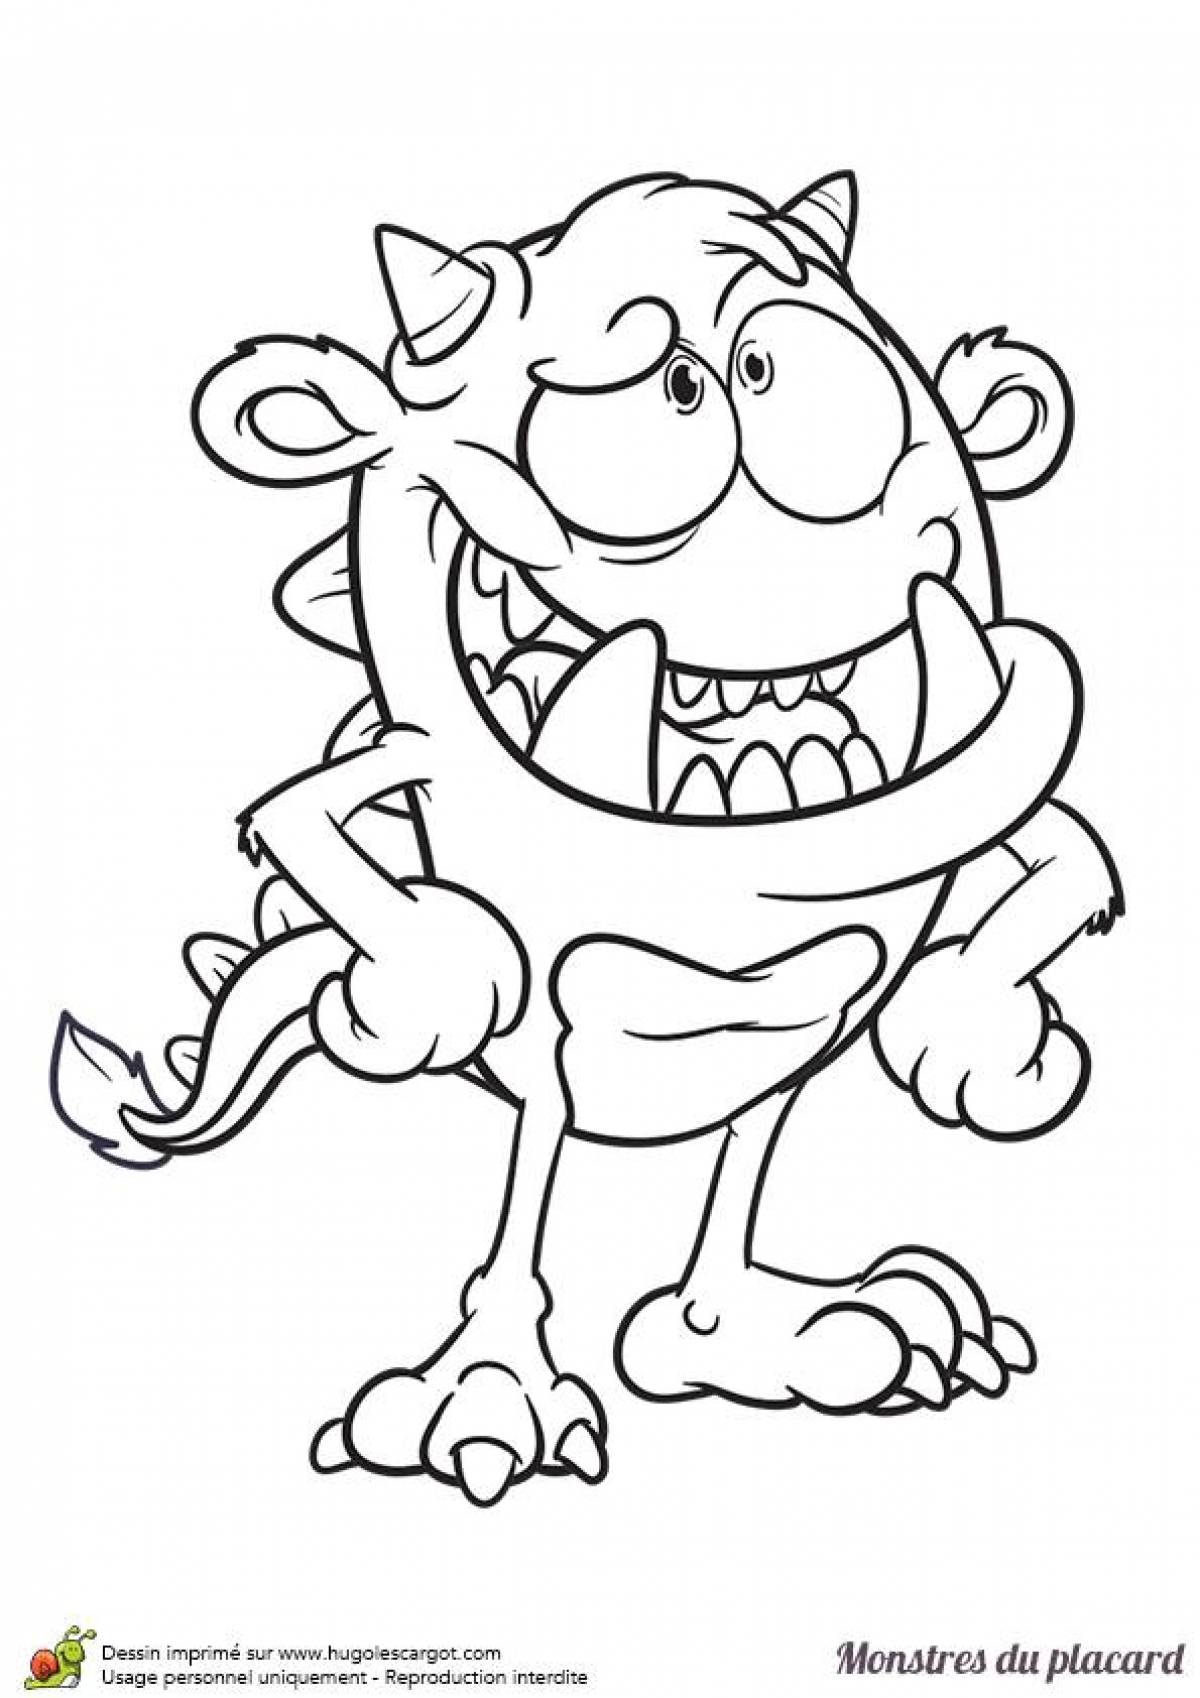 Creepy monsters coloring pages